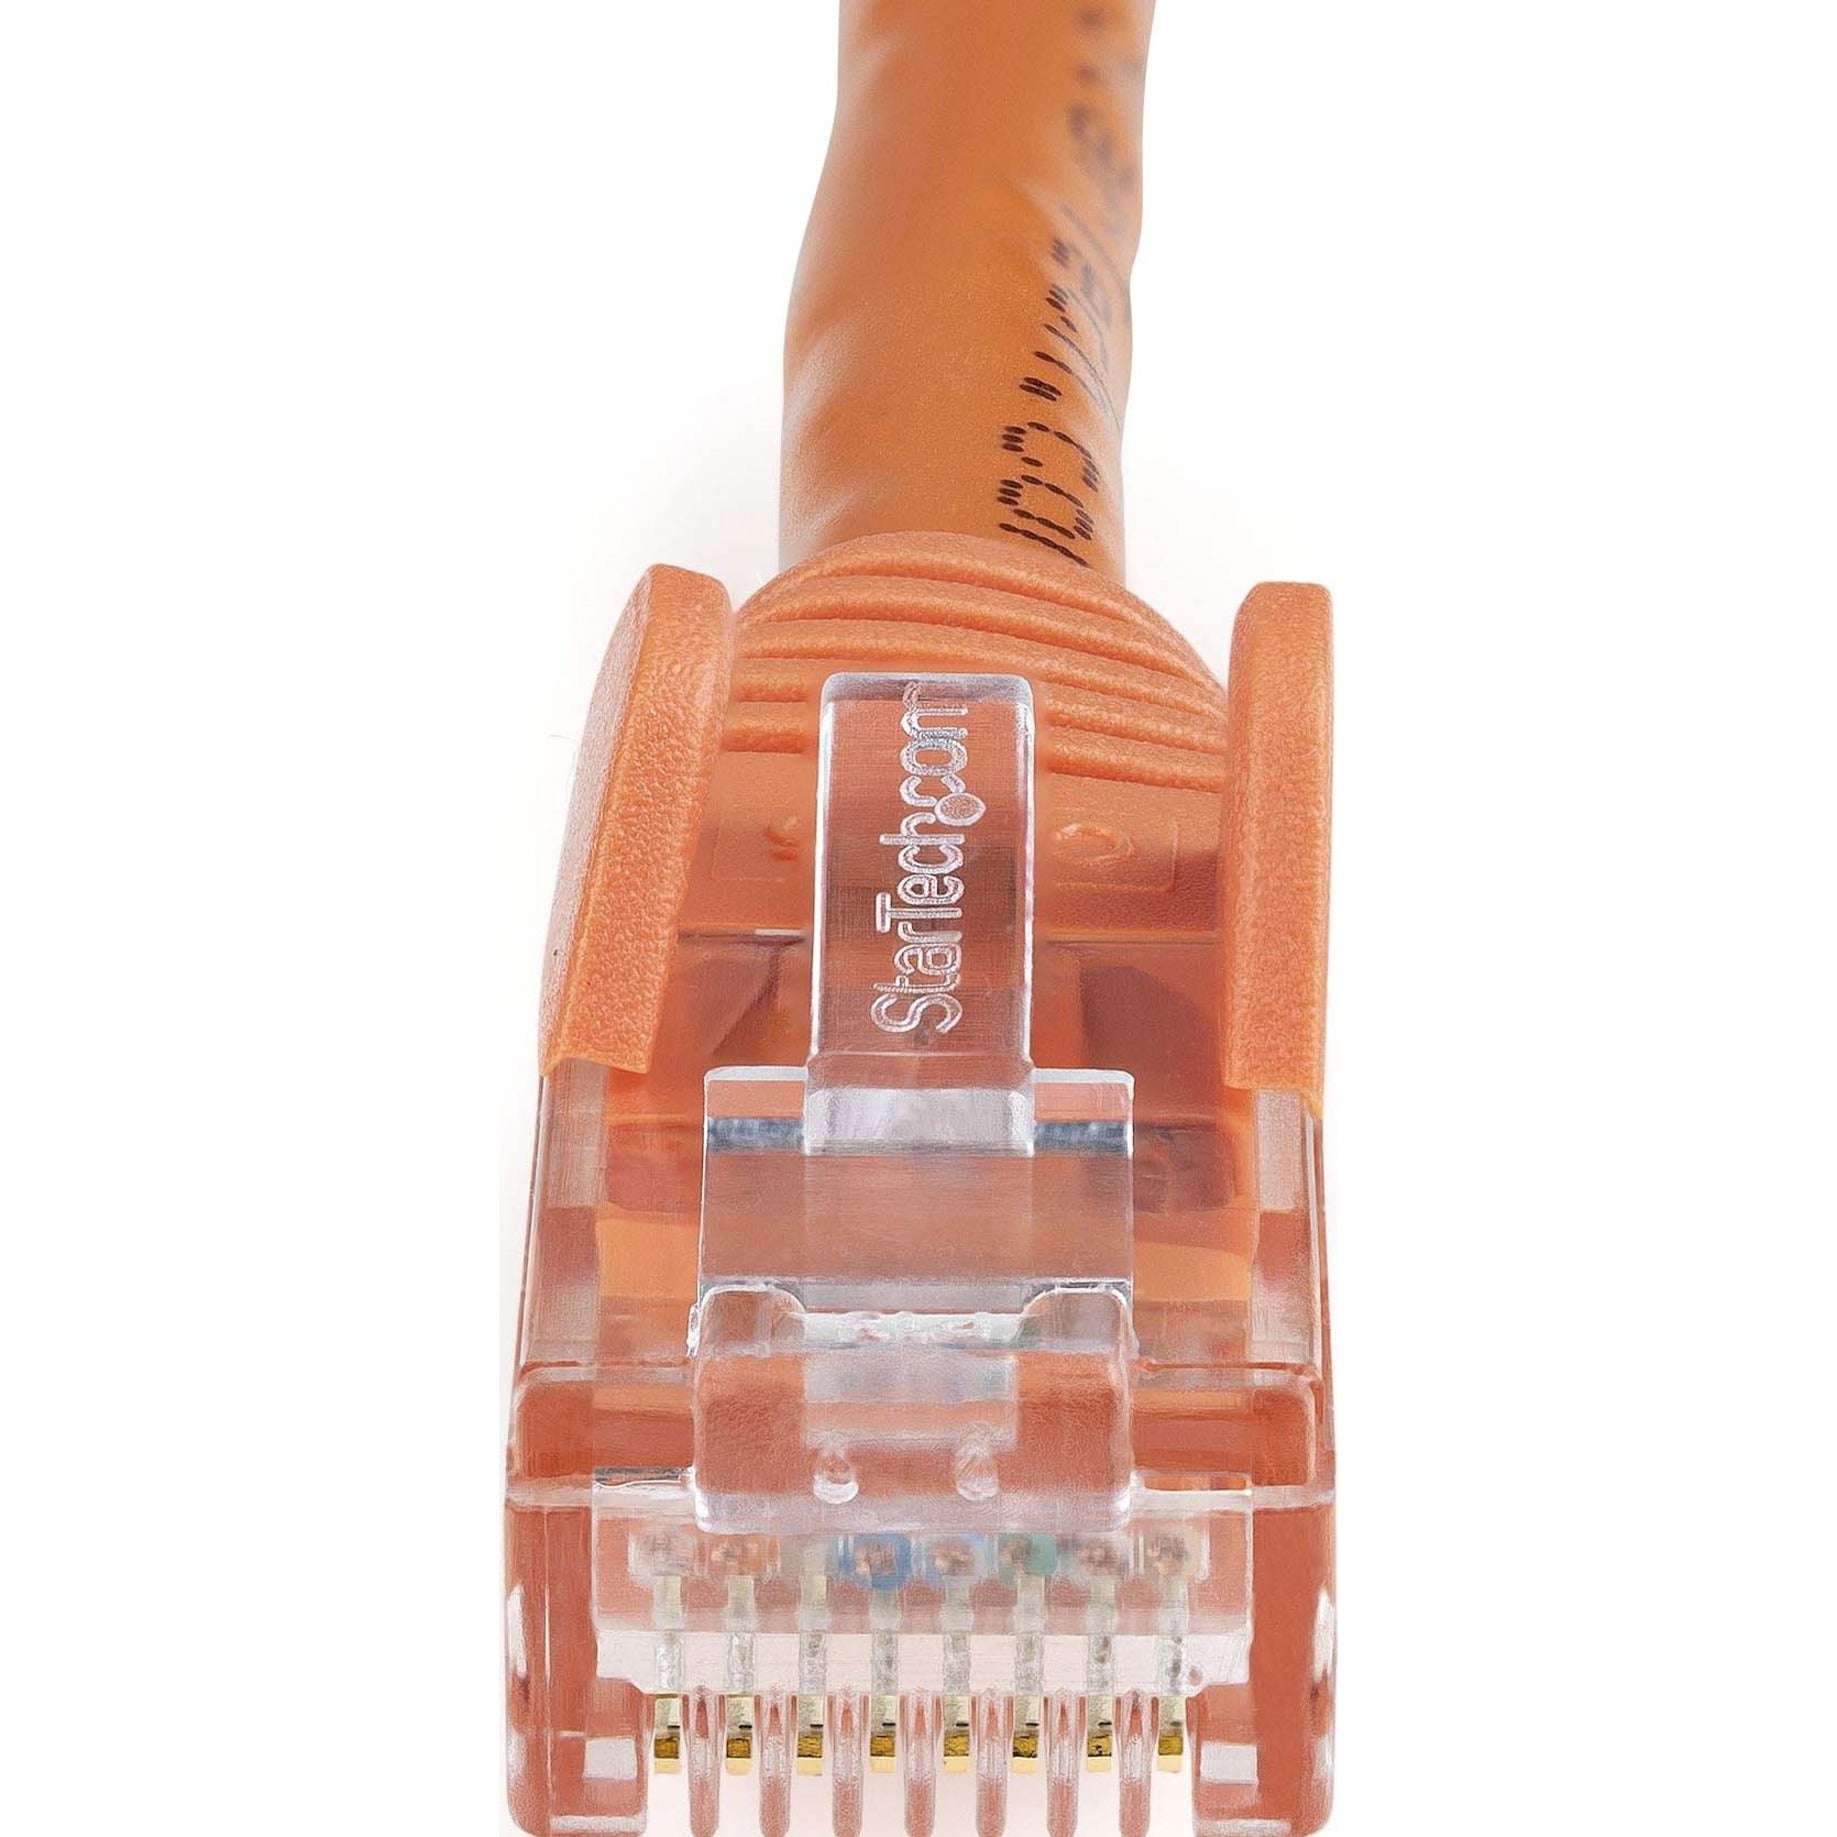 StarTech.com N6PATCH2OR Cat. 6 Network Cable, 2ft Orange Ethernet Cable, Snagless RJ45 Connectors